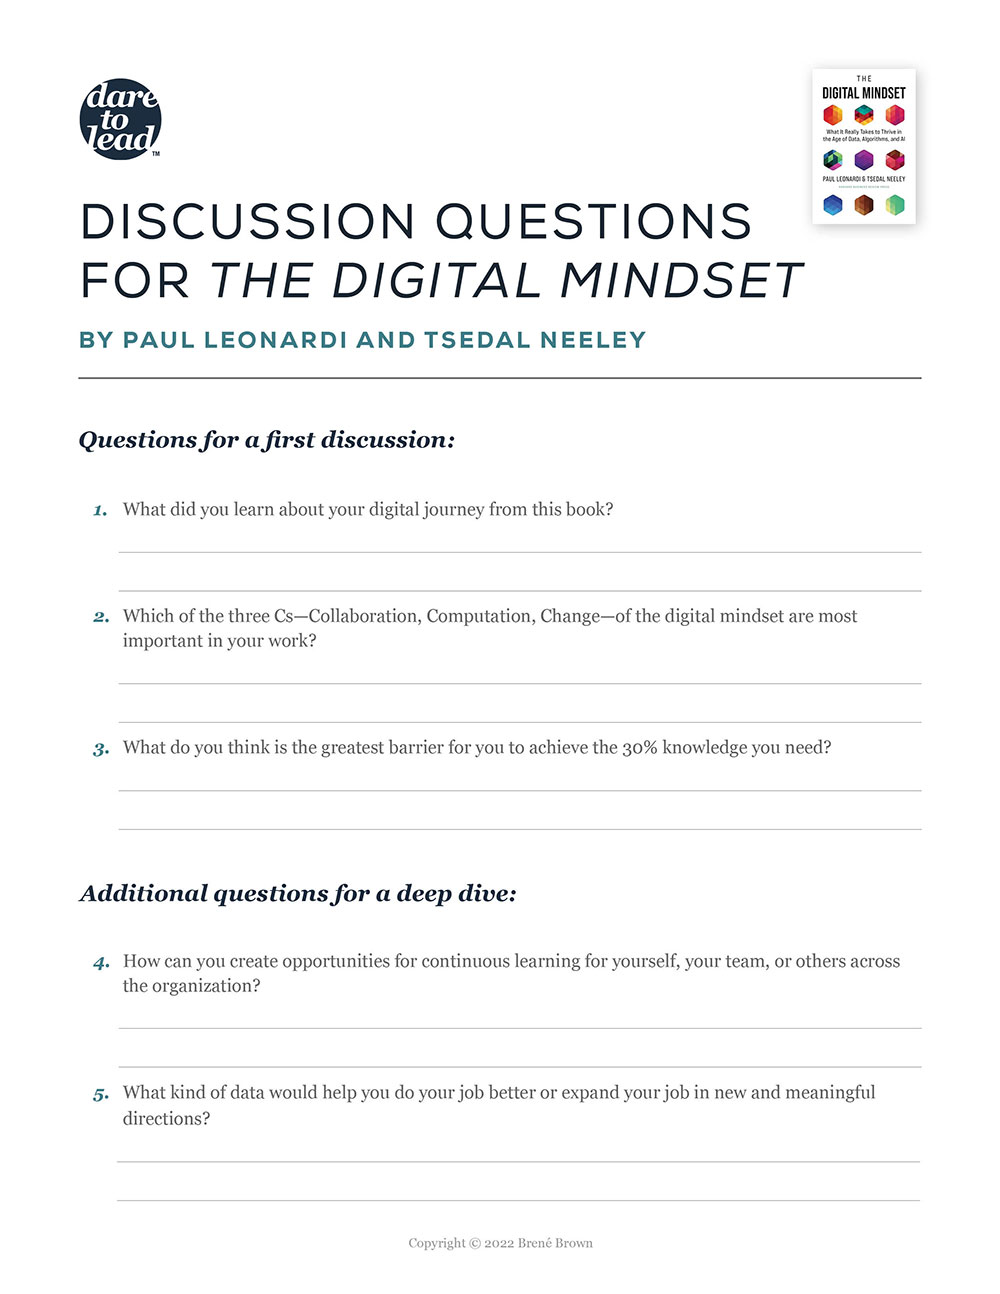 The Digital Mindset Discussion Questions by Paul Leonardi and Tsedal Neeley